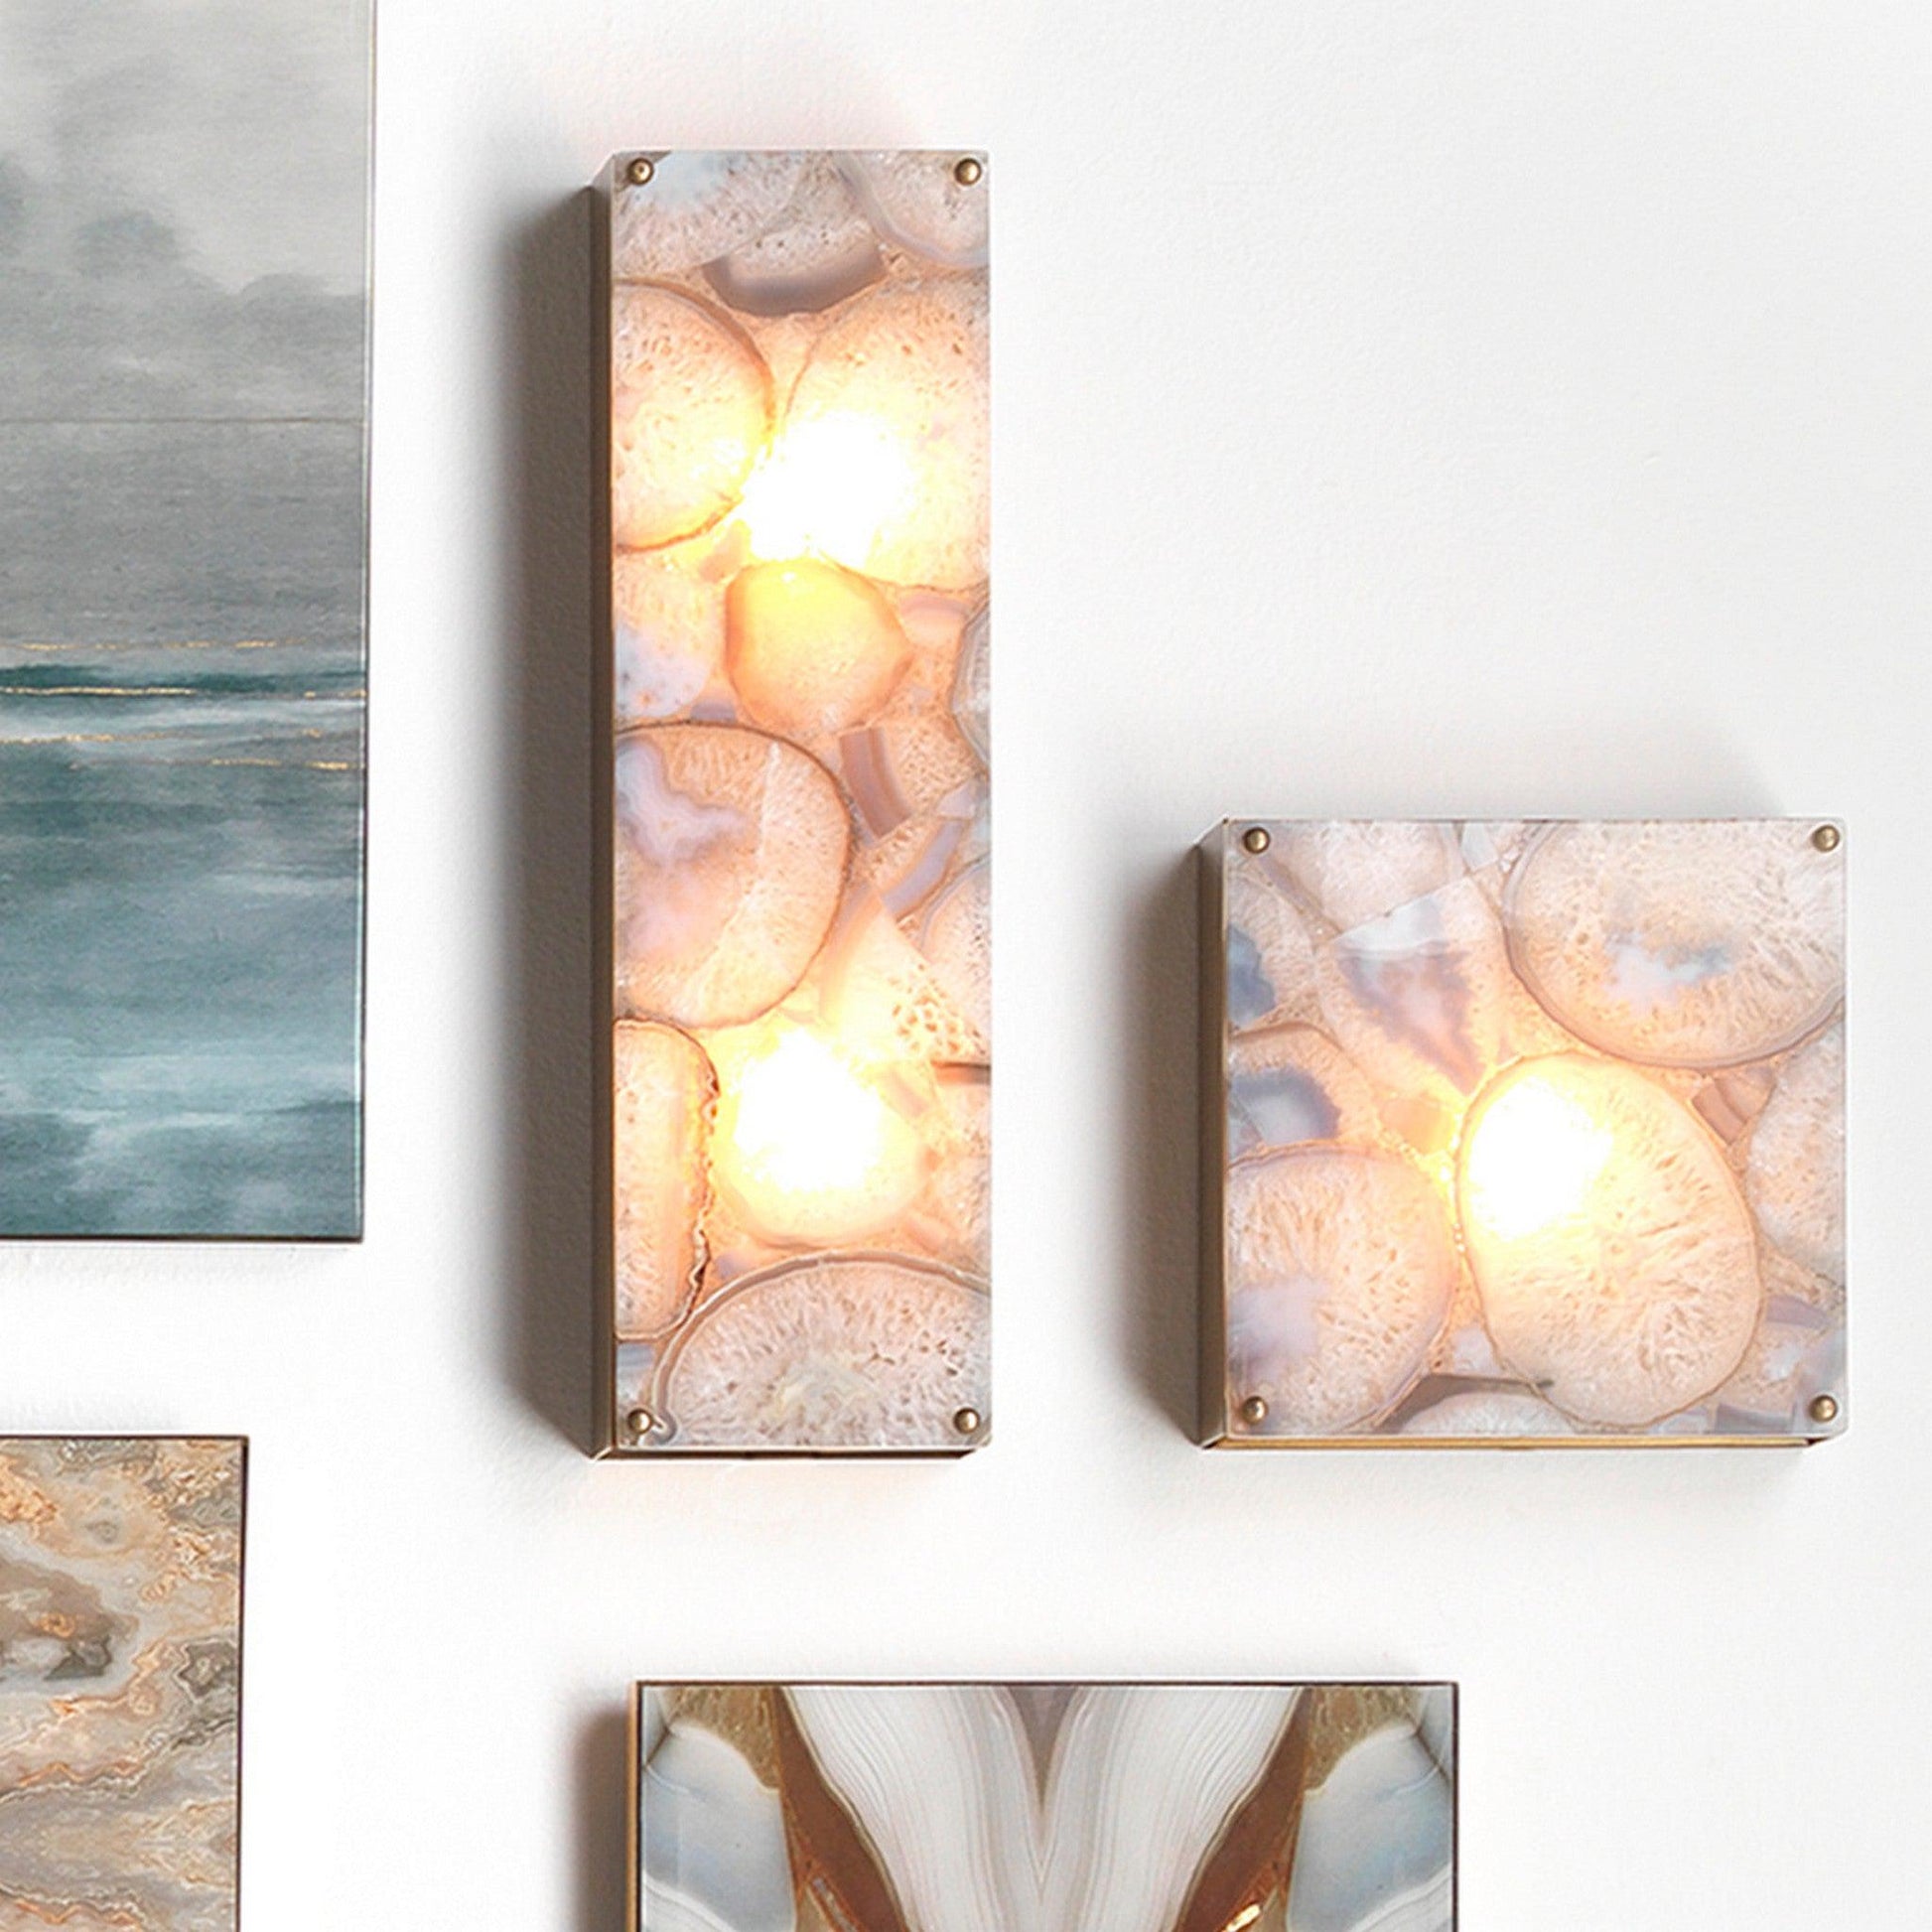 Jamie Young Adeline 9" 1-Light Square Agate Resin and Antique Brass Wall Sconce